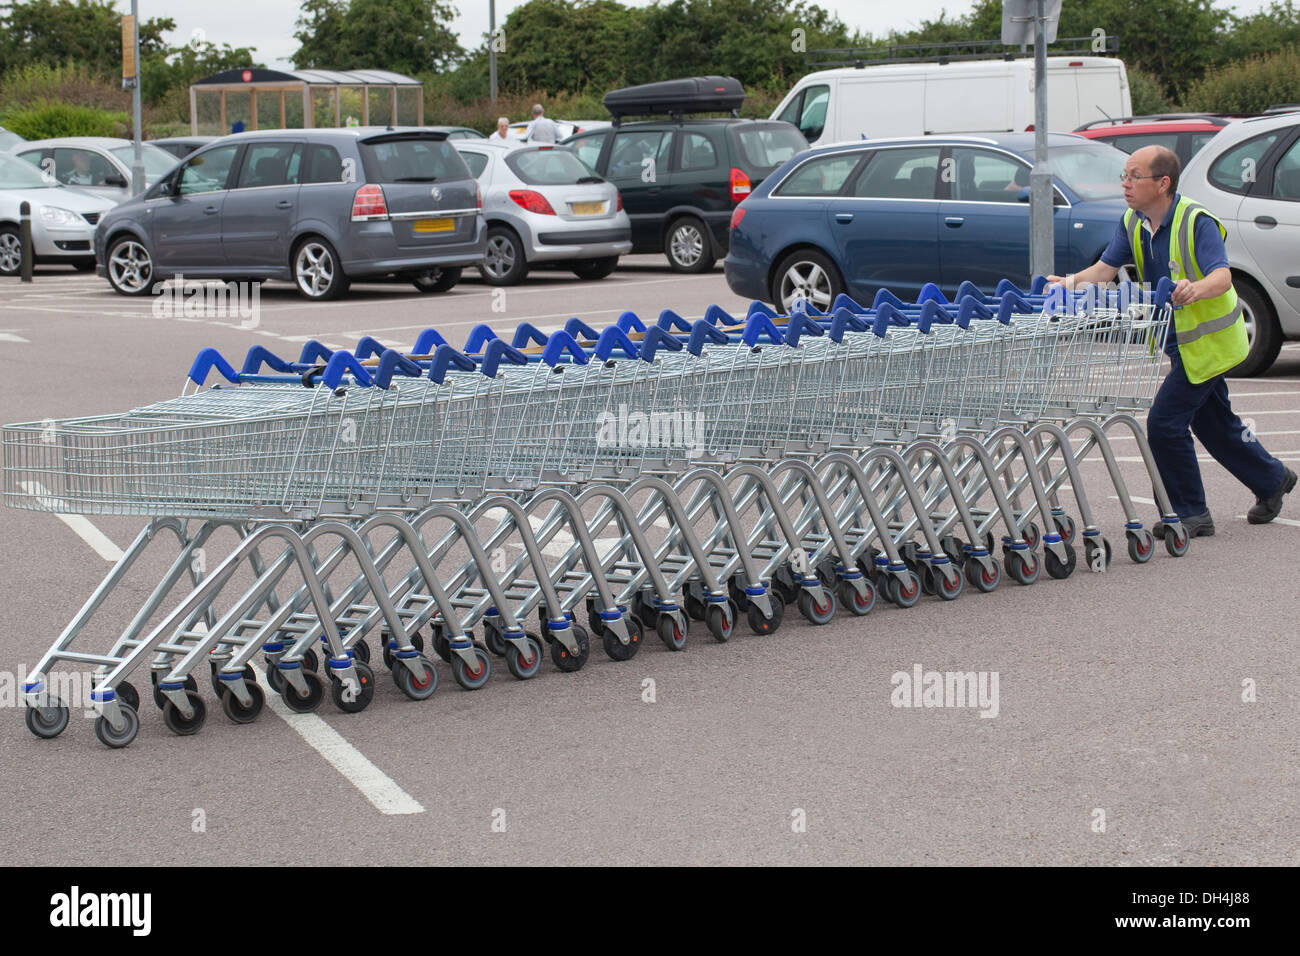 Supermarket Shopping Trolleys, having been emptied by customers, now being returned to borrowing bays by a staff member. Stock Photo